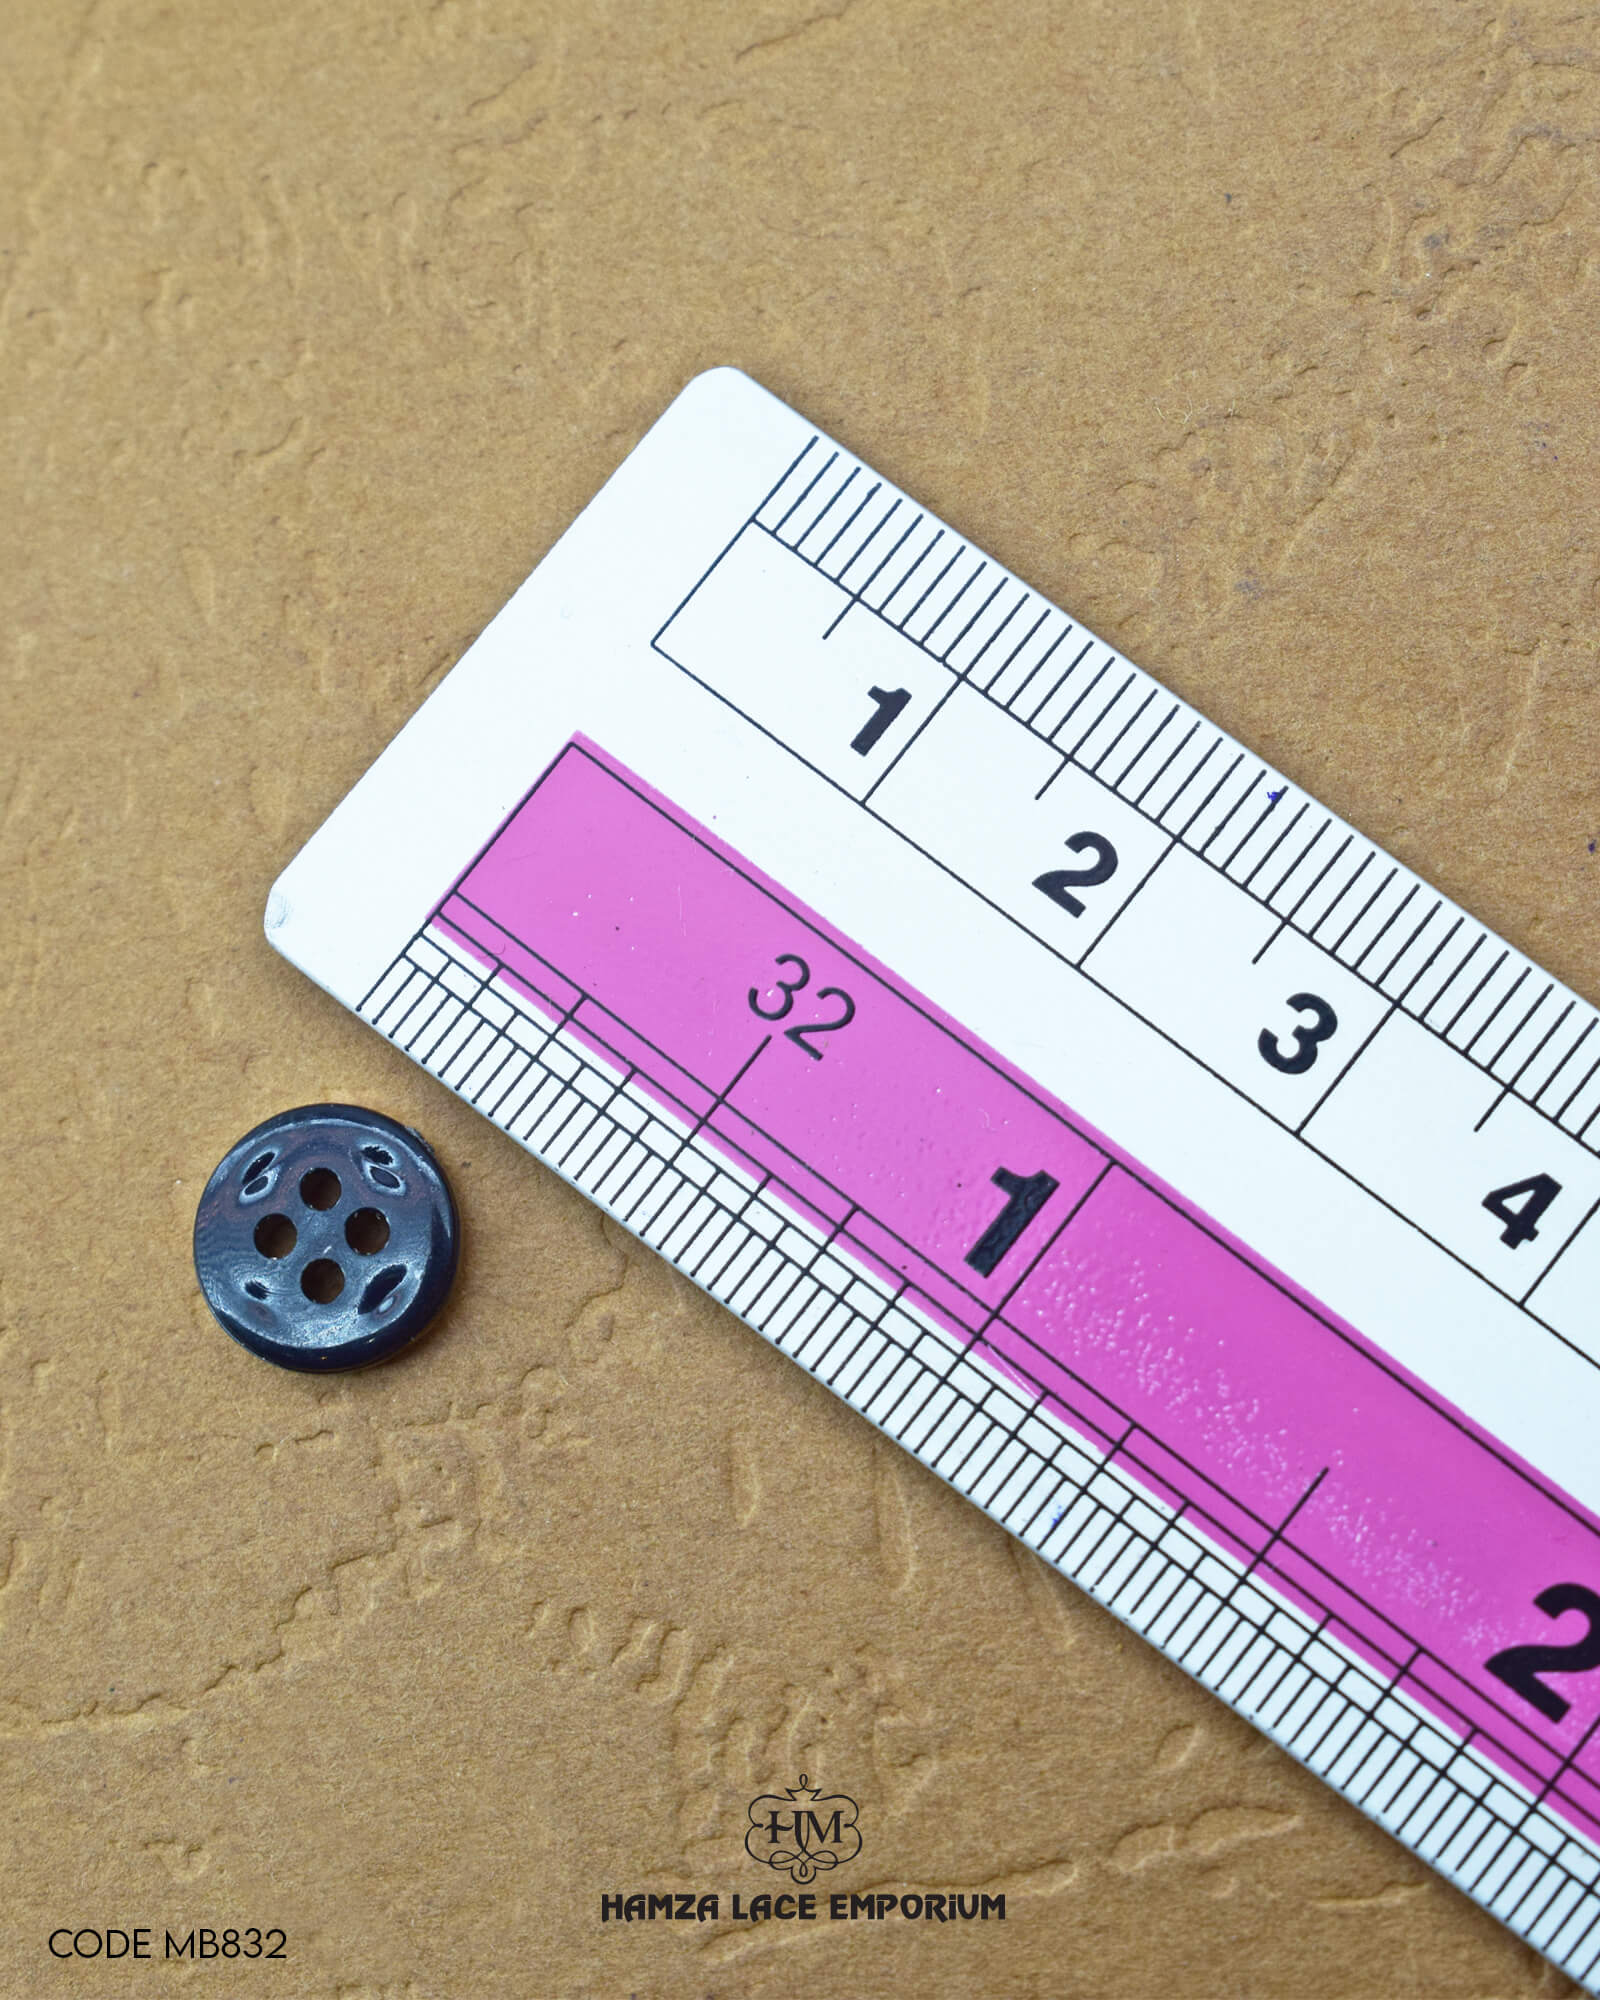 The dimensions of the 'Golden Metal Button MB832' are determined using a ruler.